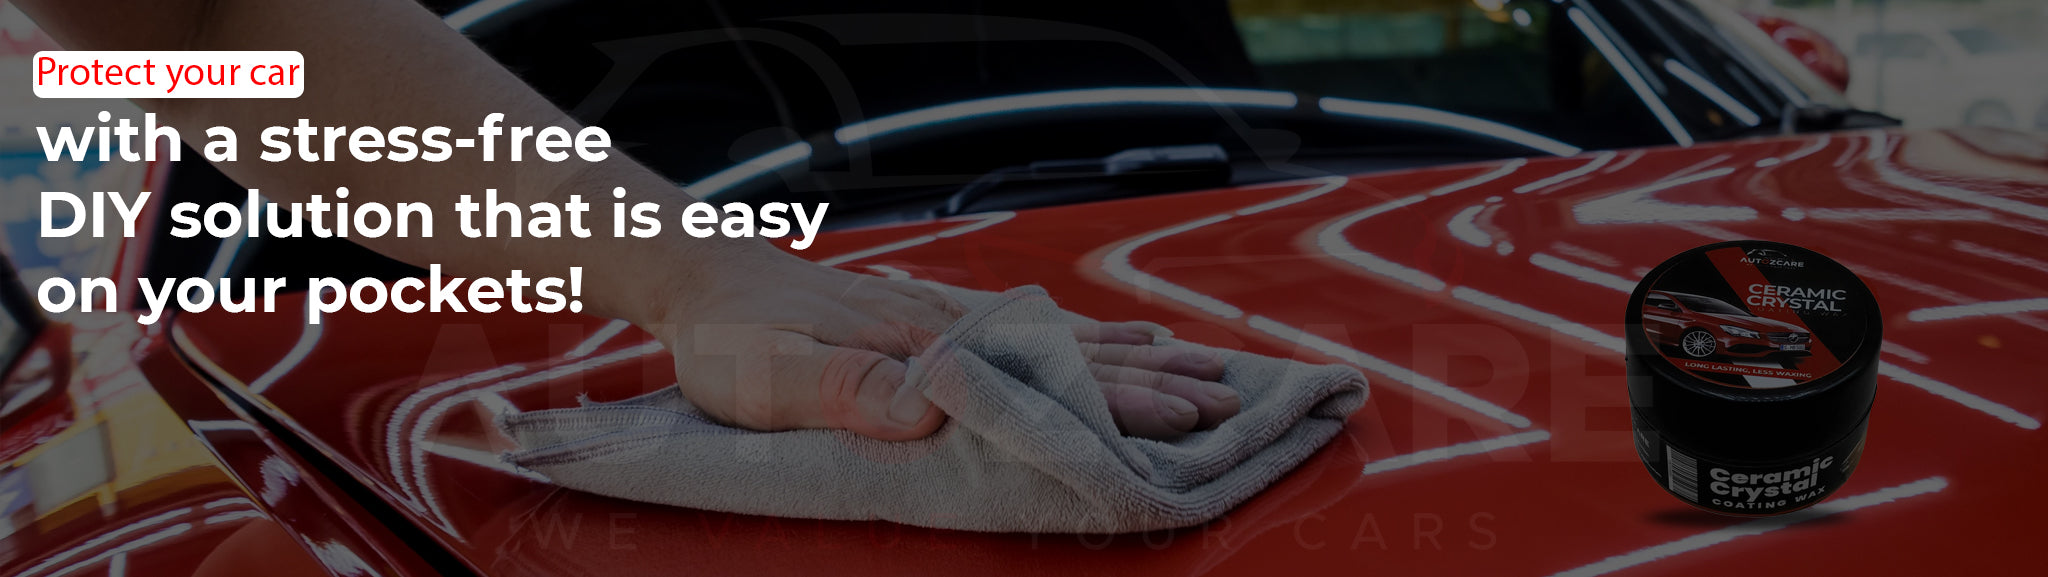 Protect your car with a stress-free DIY solution that is easy on your pockets!